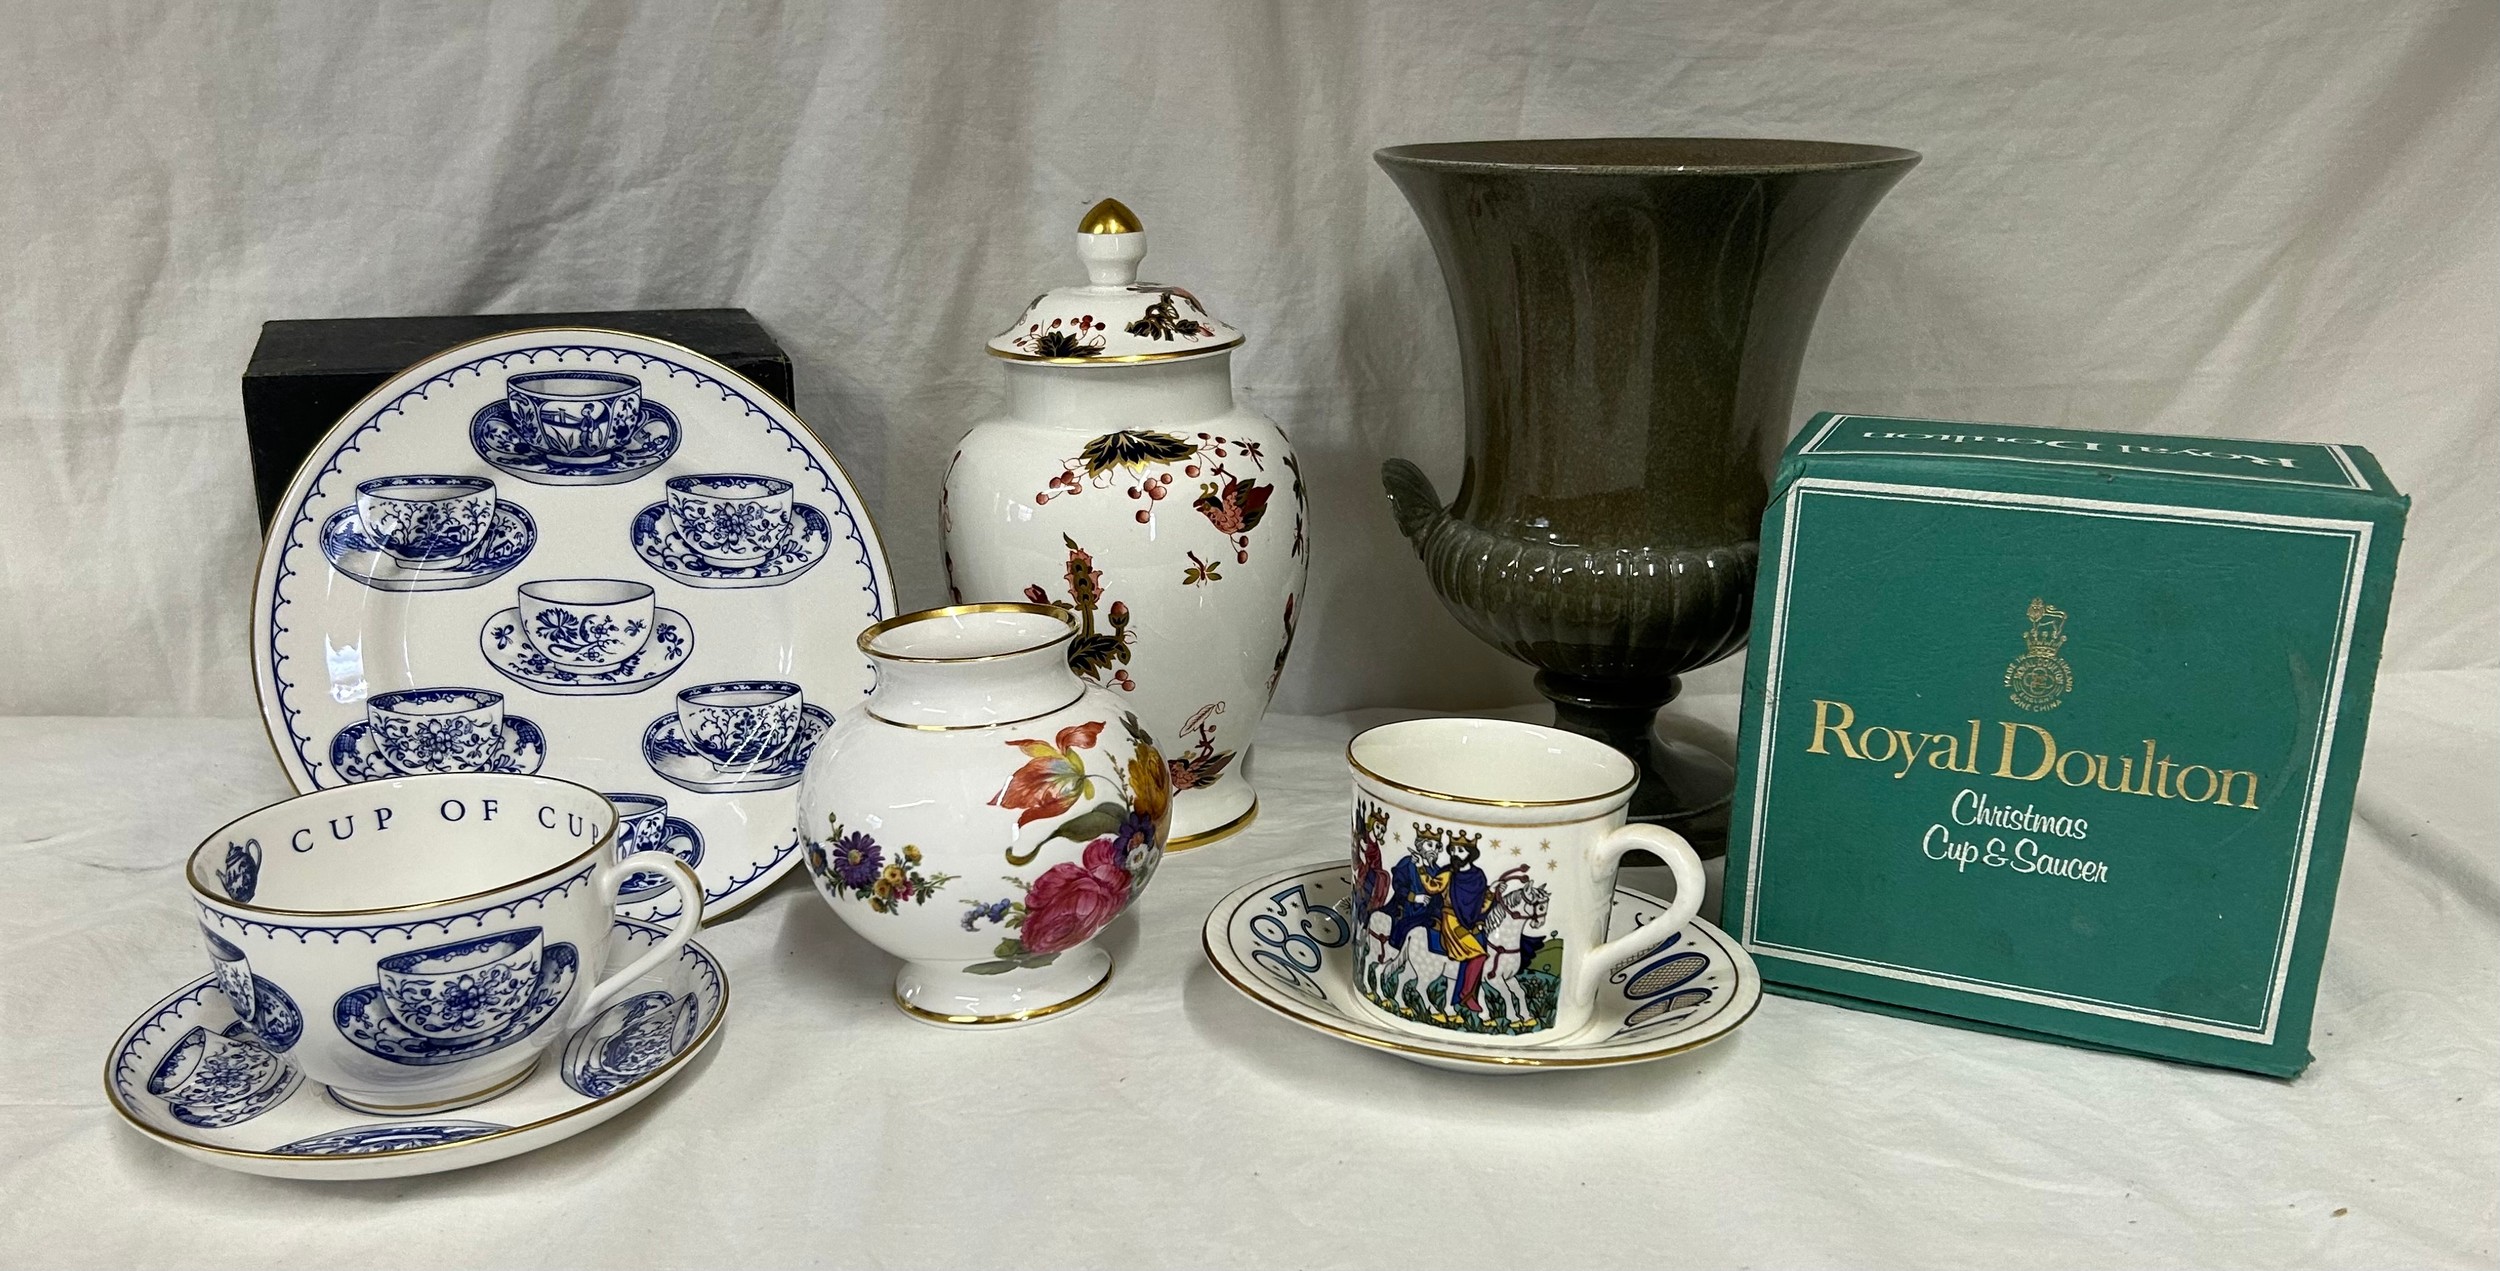 Selection of english ceramics: Royal Worcester "Cup of Cups" cup and saucer and plate (box with